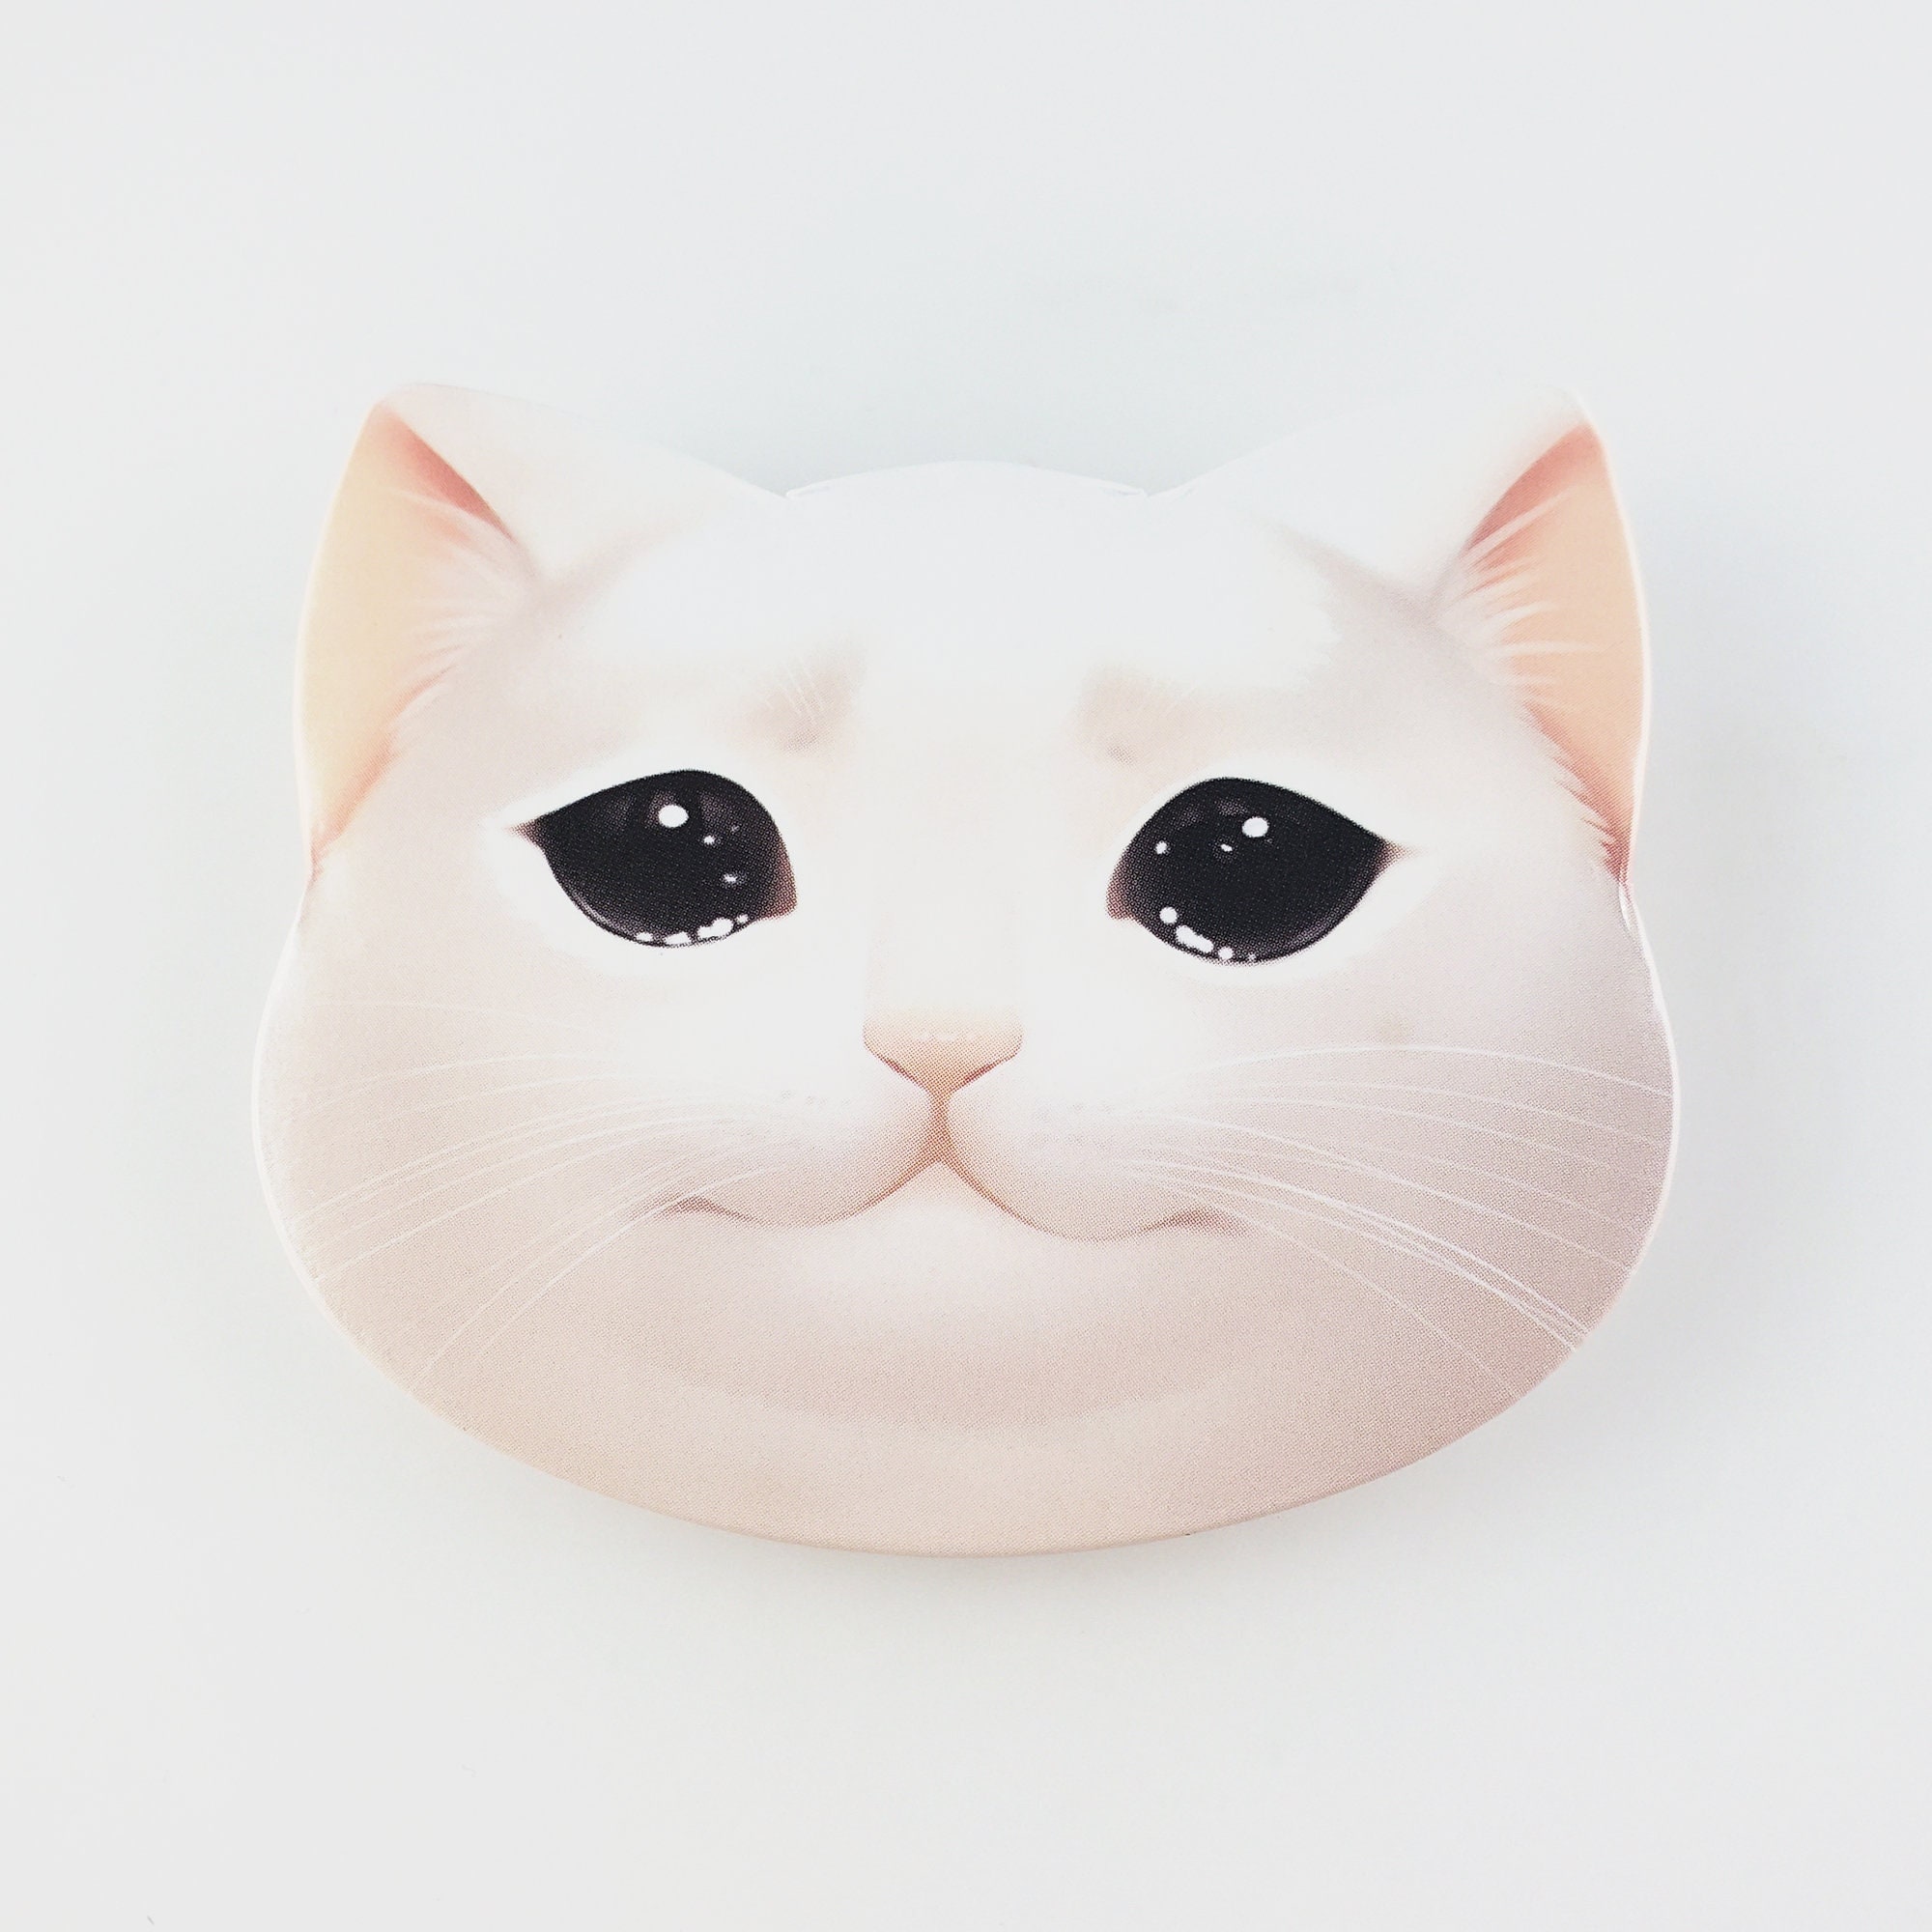 Beluga Cat Pfp Pins and Buttons for Sale